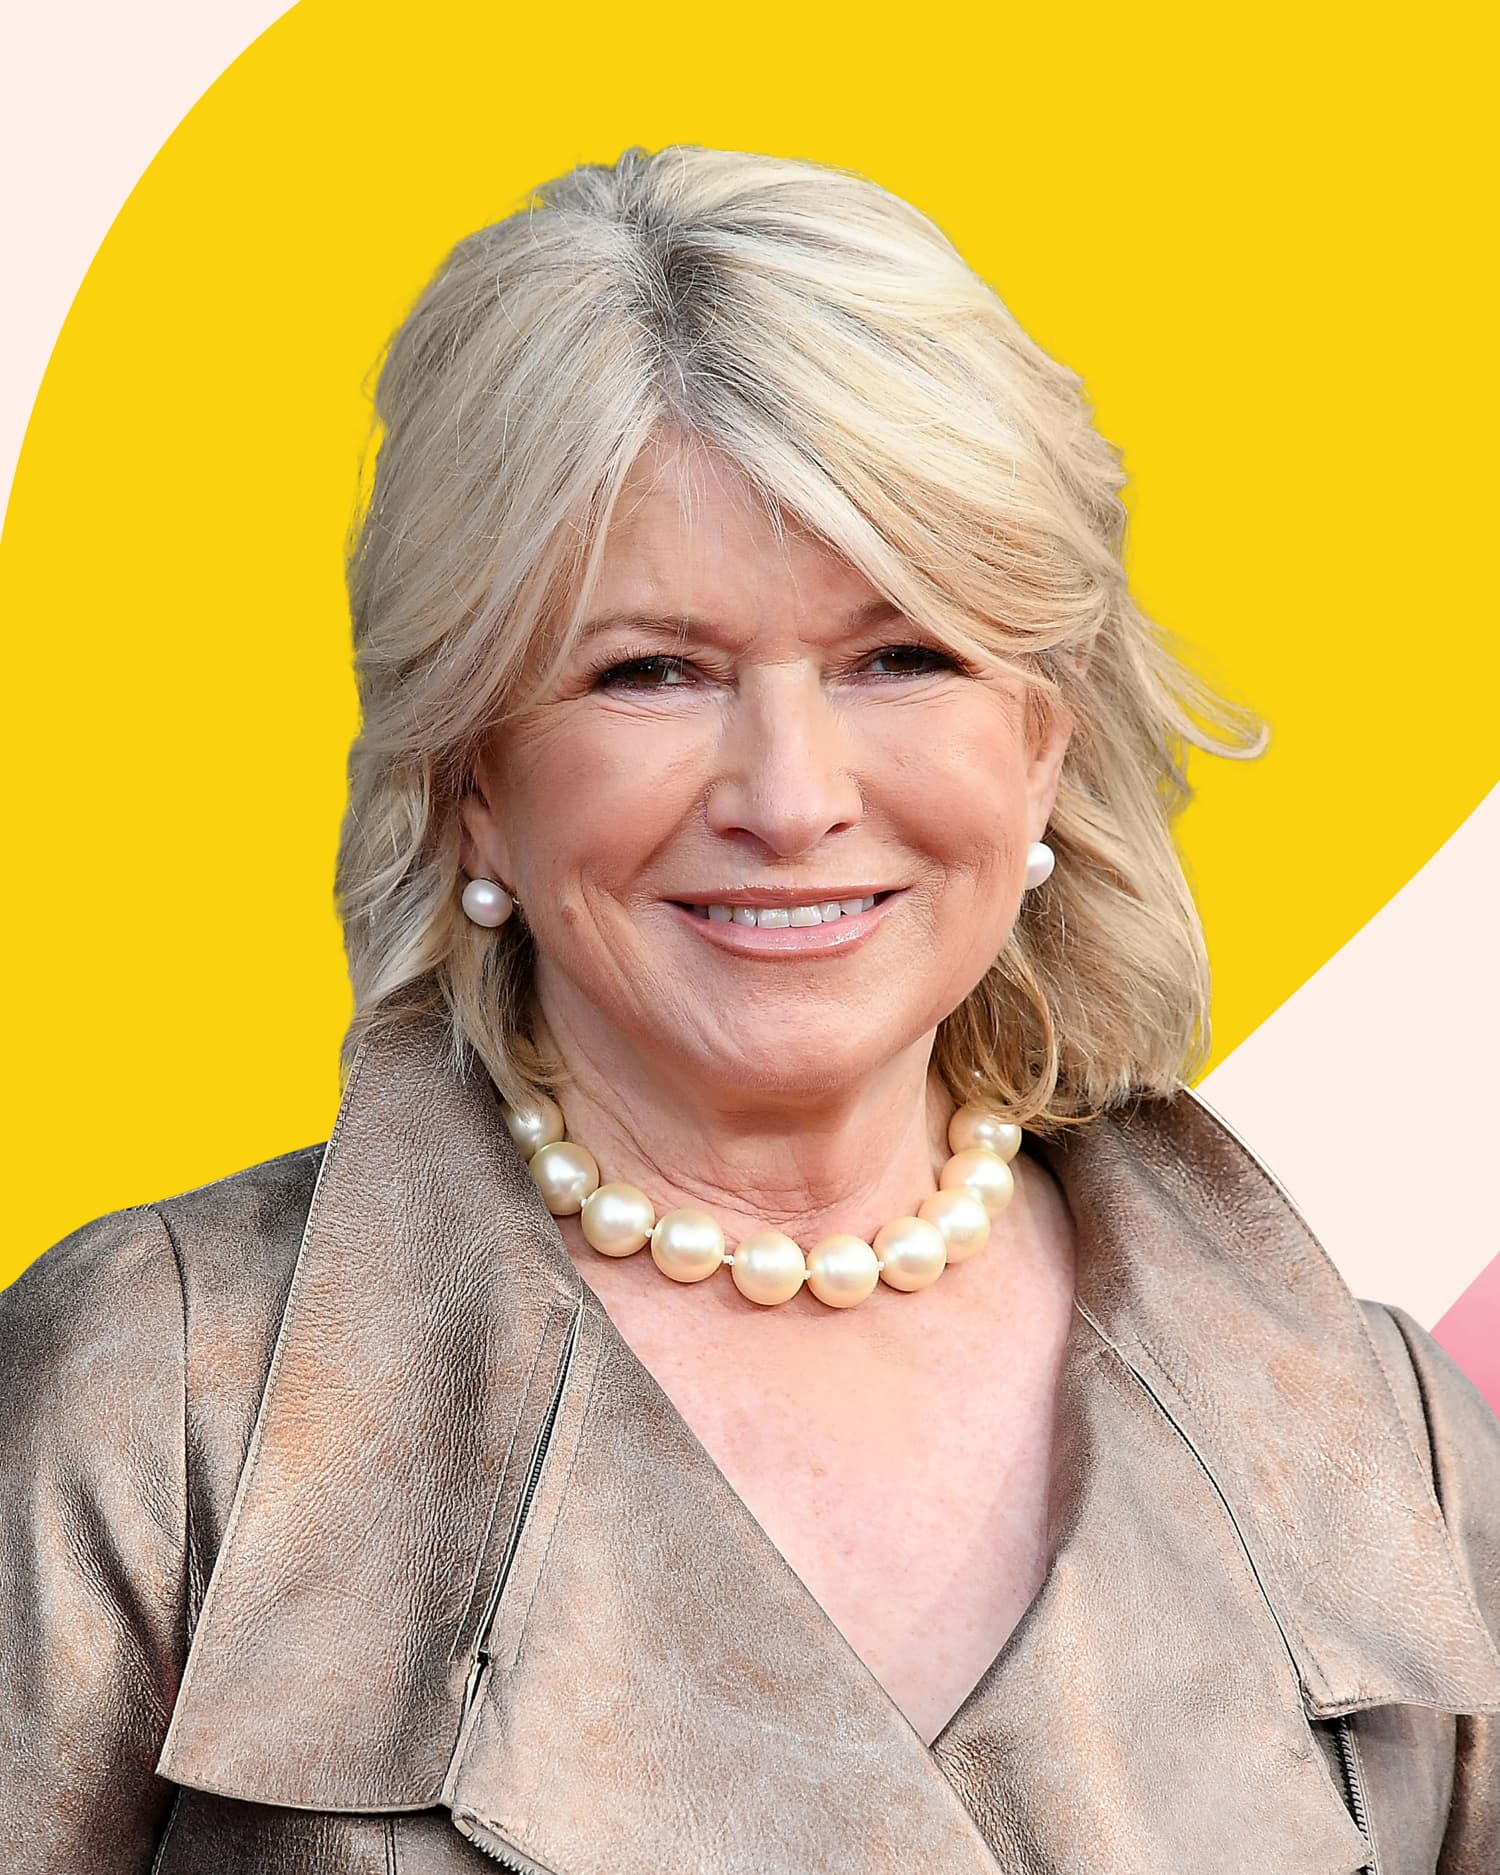 You Can Now Shop Martha Stewart’s Favorite Etsy Items, and They’re All Worth the Spend